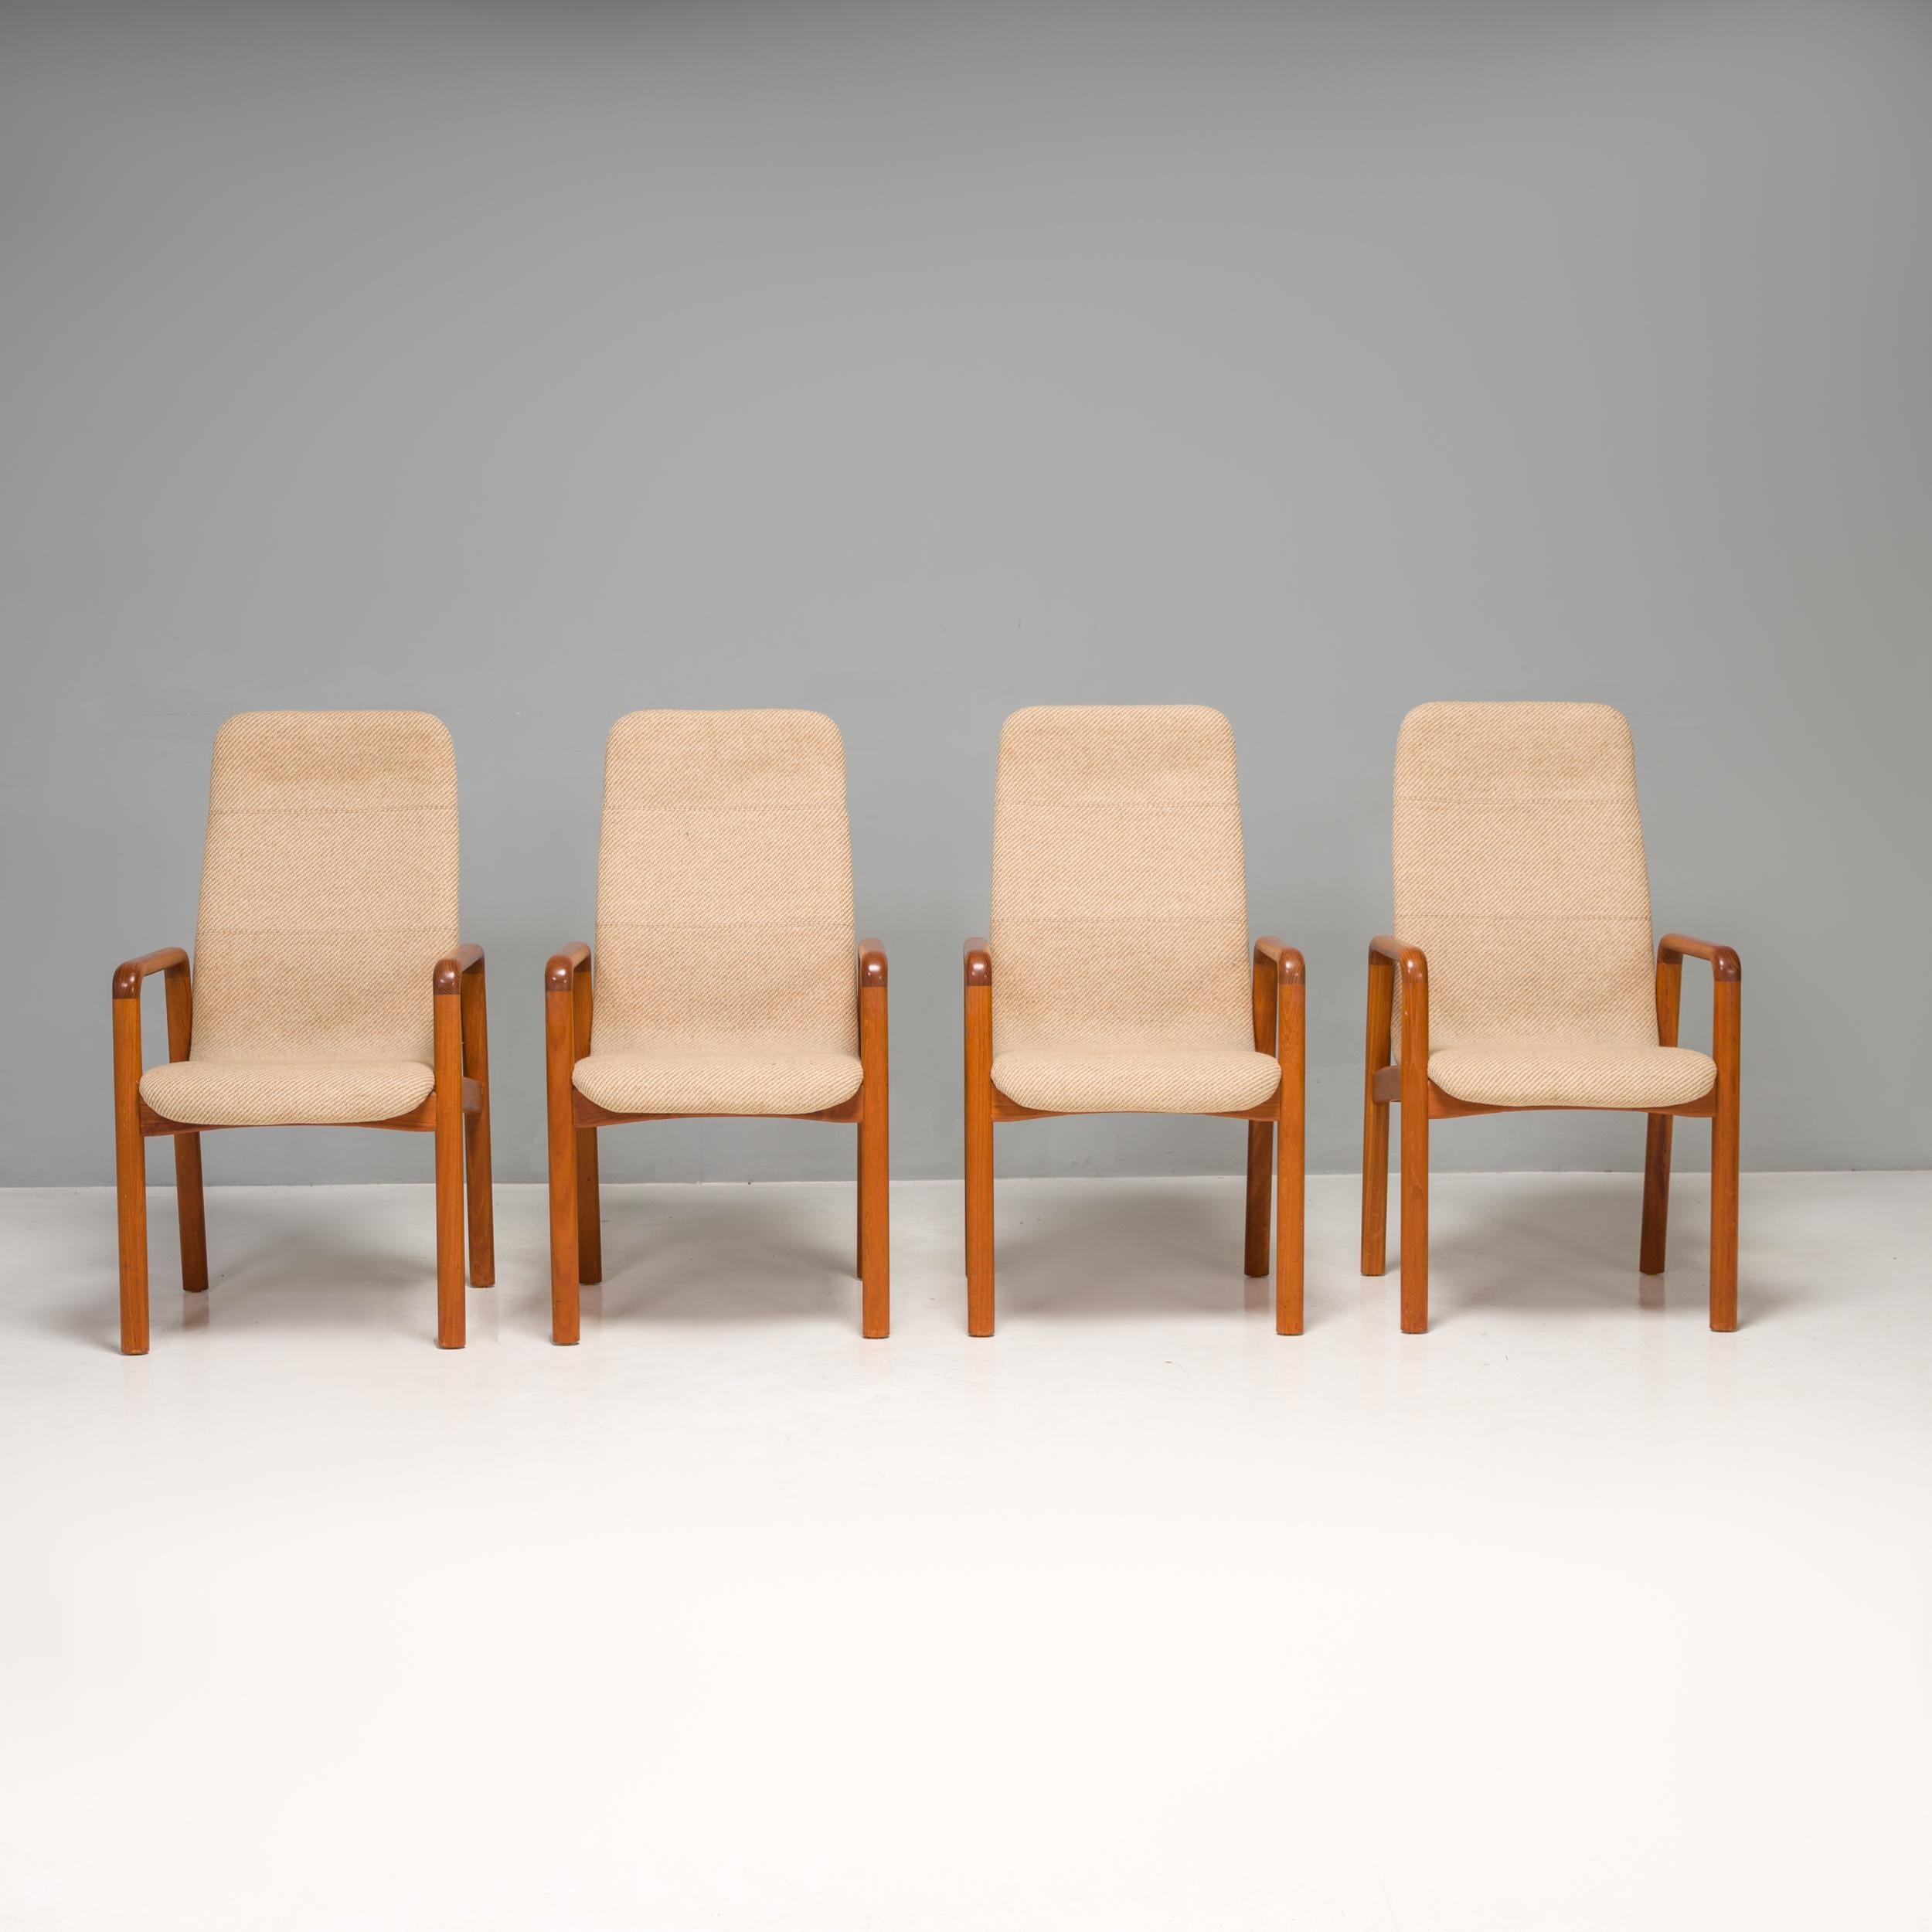 A fantastic example of midcentury Danish design, this set of chairs was manufactured by Dyrlund.

Constructed from teak frames with softly curved armrests and cylindrical legs, the chairs have an organic Silhouette with high backs for extra